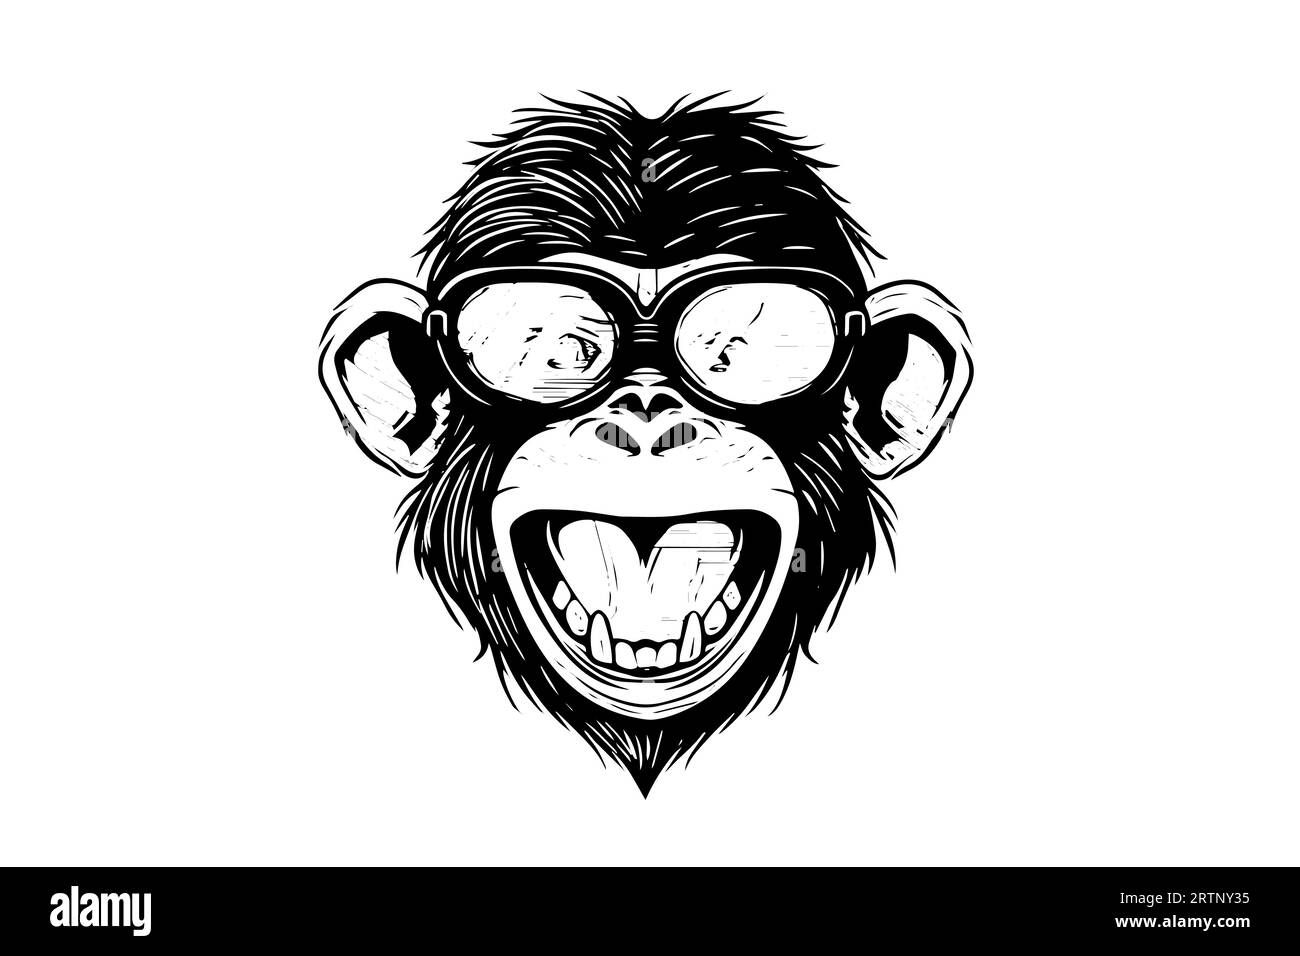 Monkey face in glasses hand drawn vector illustration in engraving style ink sketch. Stock Vector